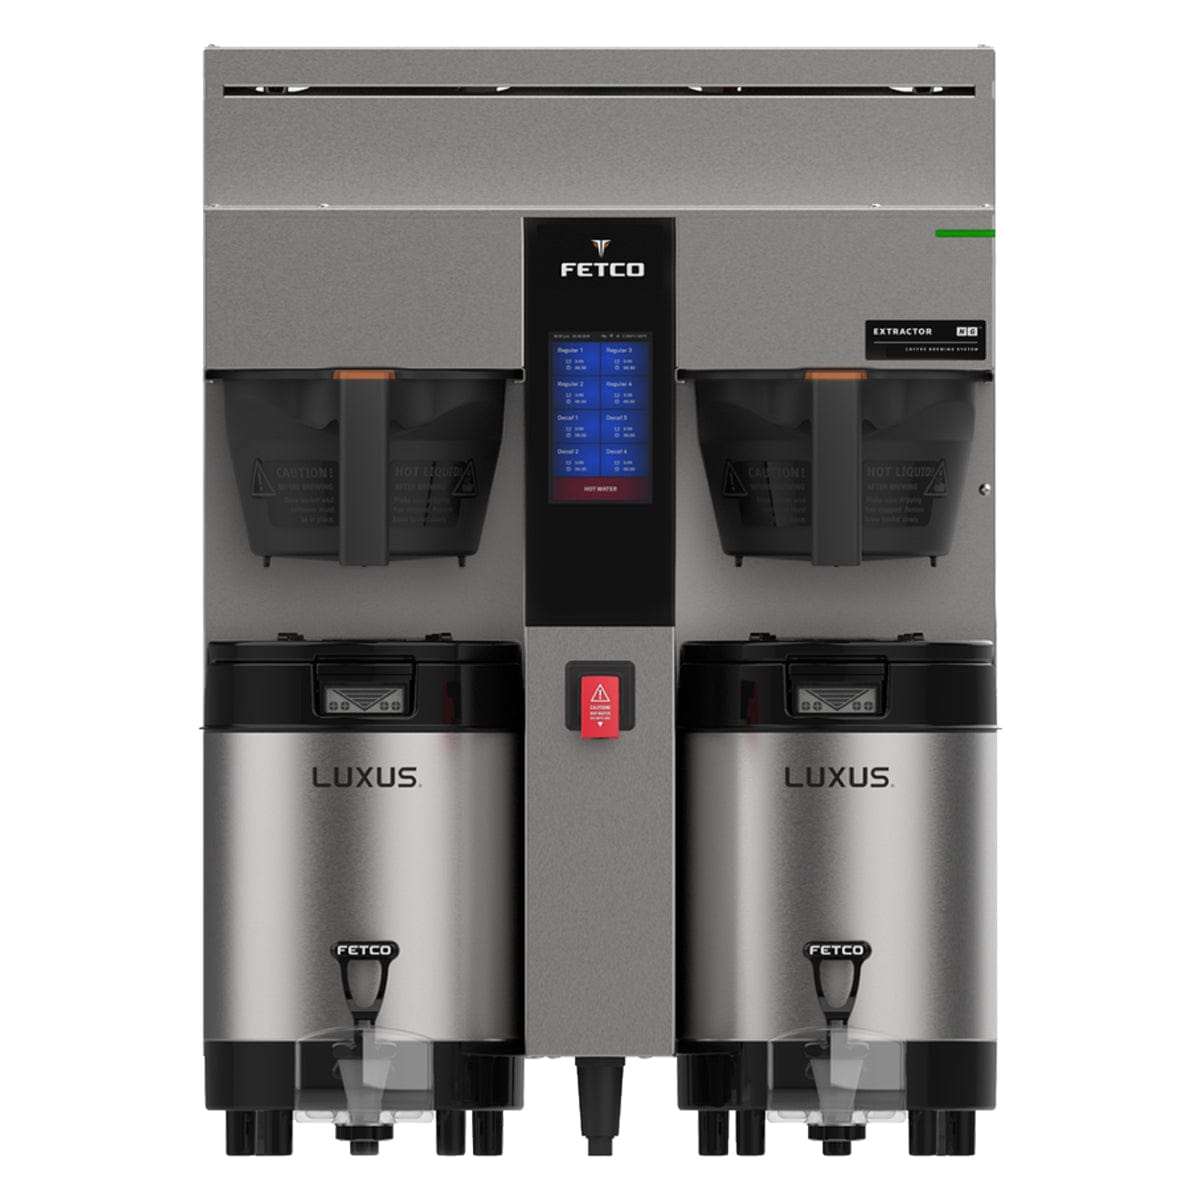 Fetco Fetco CBS-2232 NG Twin-Station Coffee Brewer